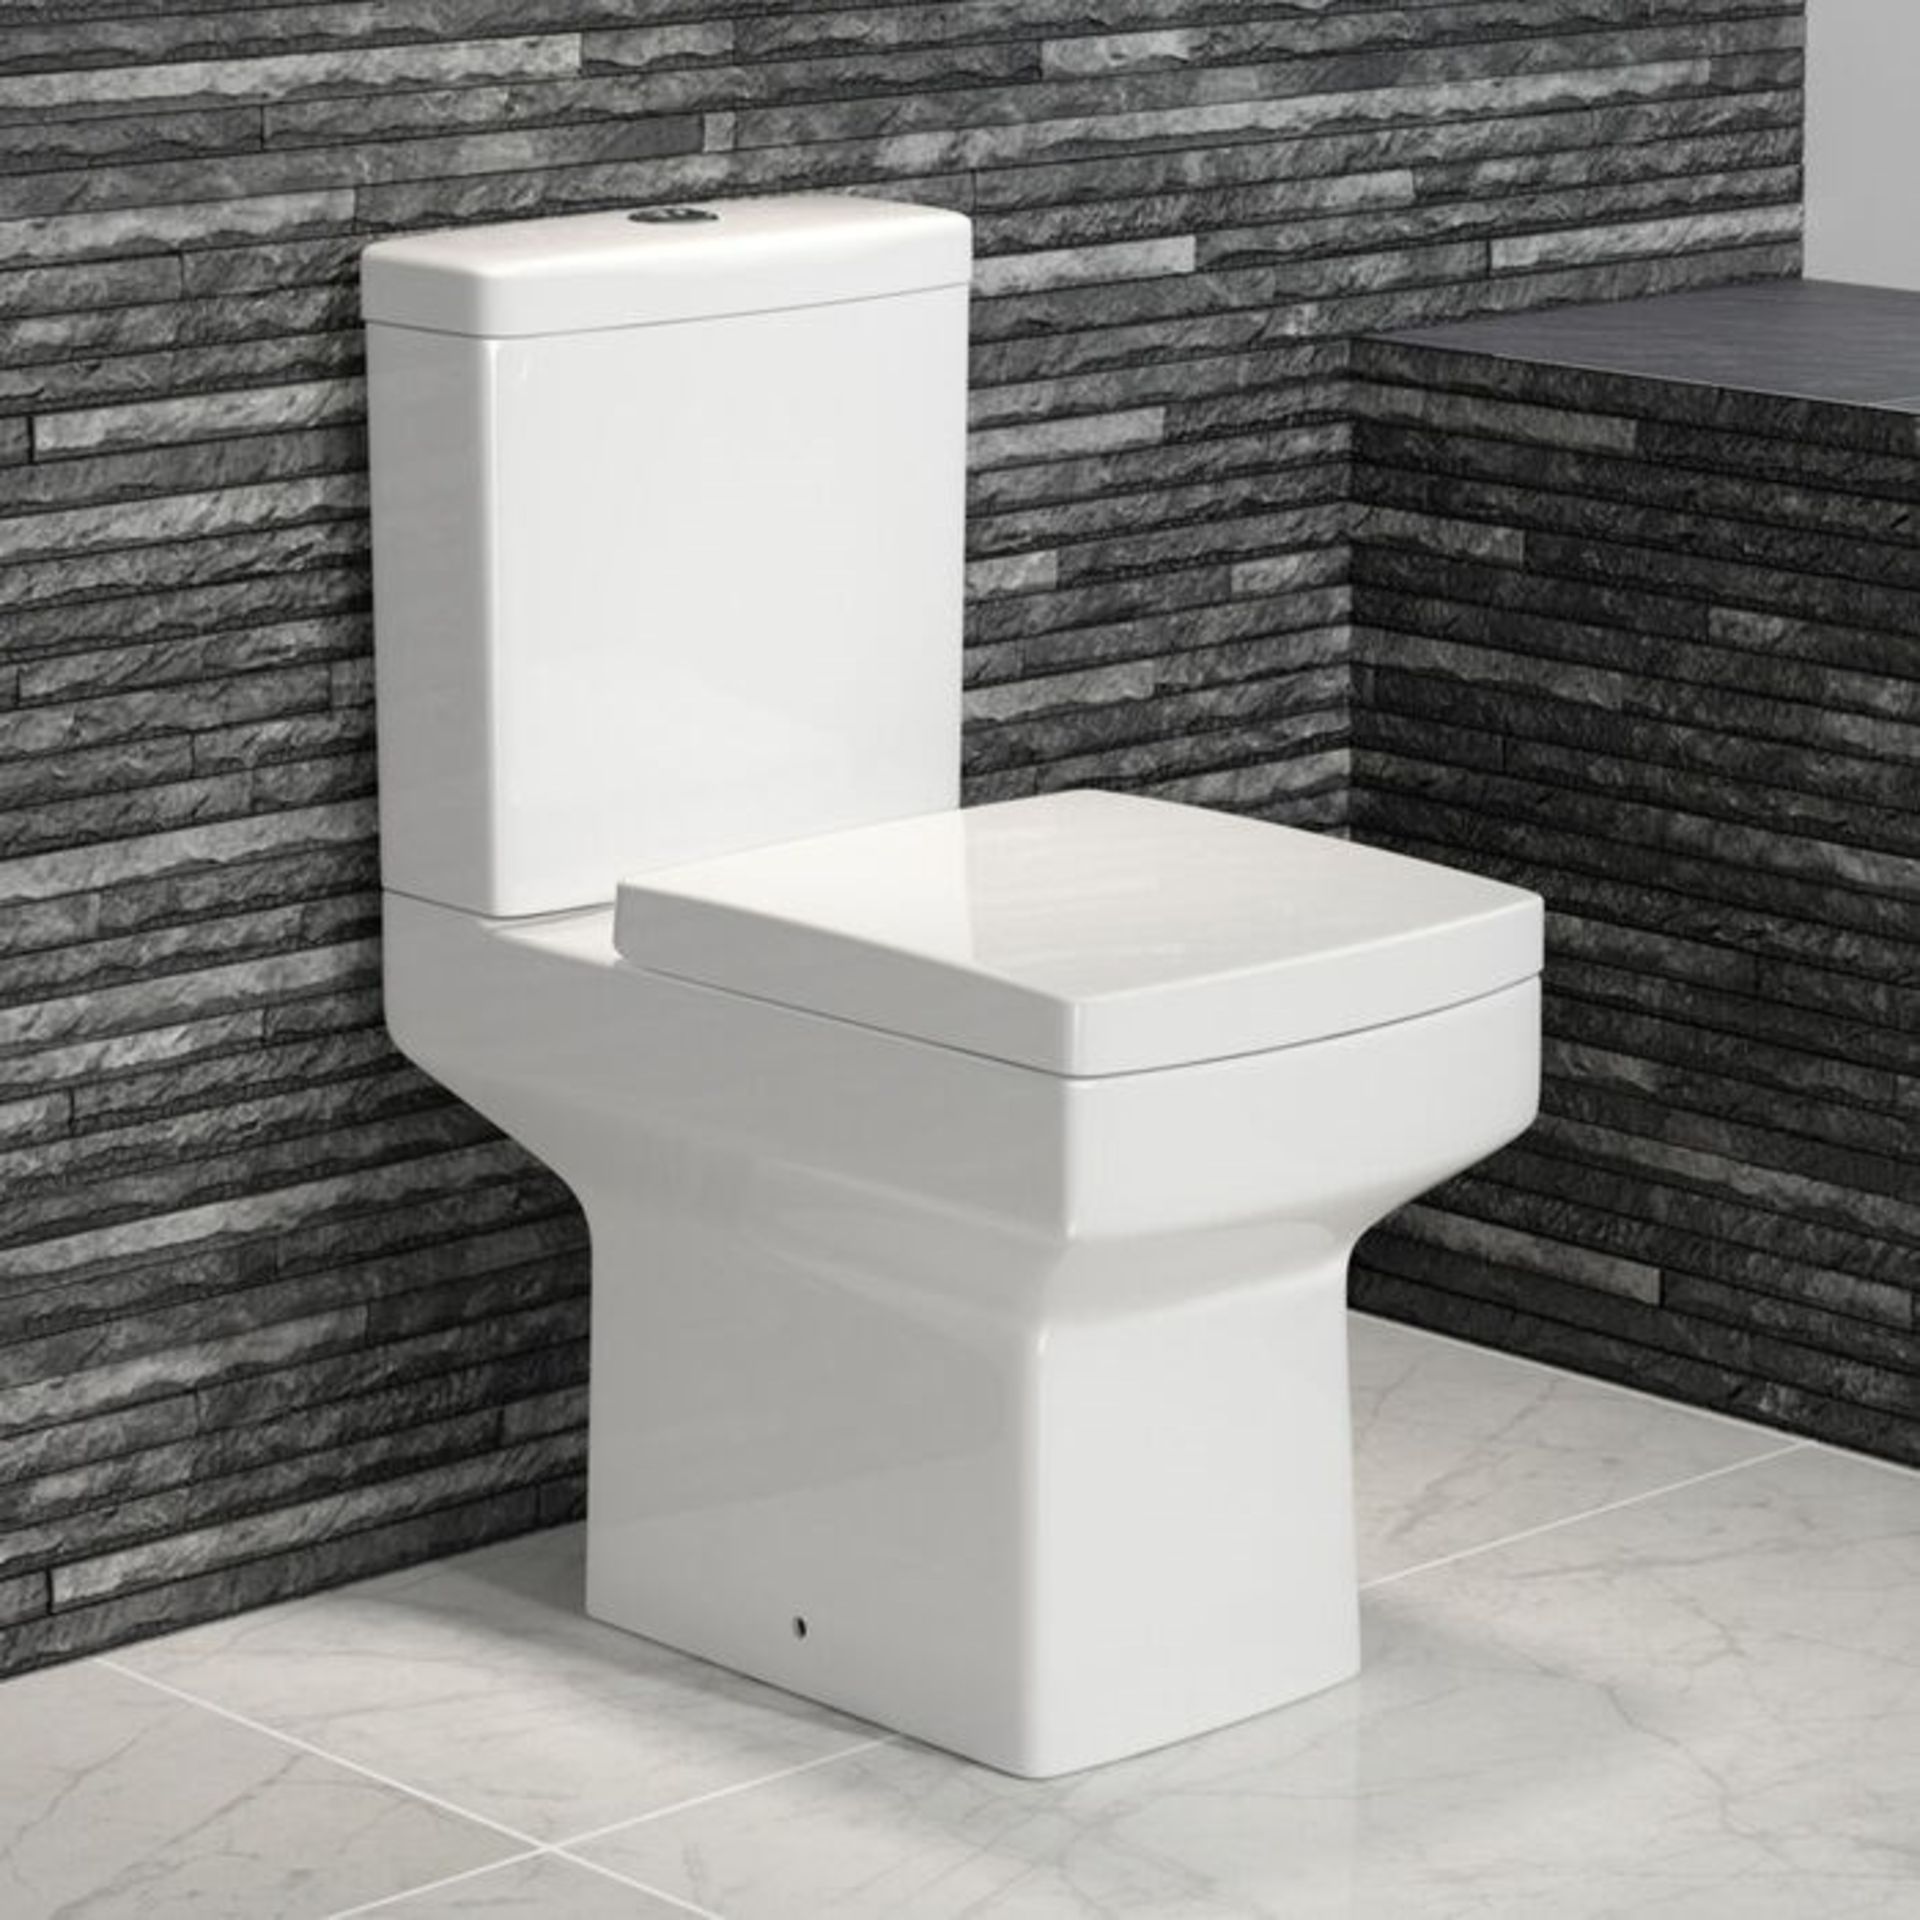 (AA111) Belfort Close Coupled Toilet & Cistern inc Soft Close Seat Made from White Vitreous Chi...